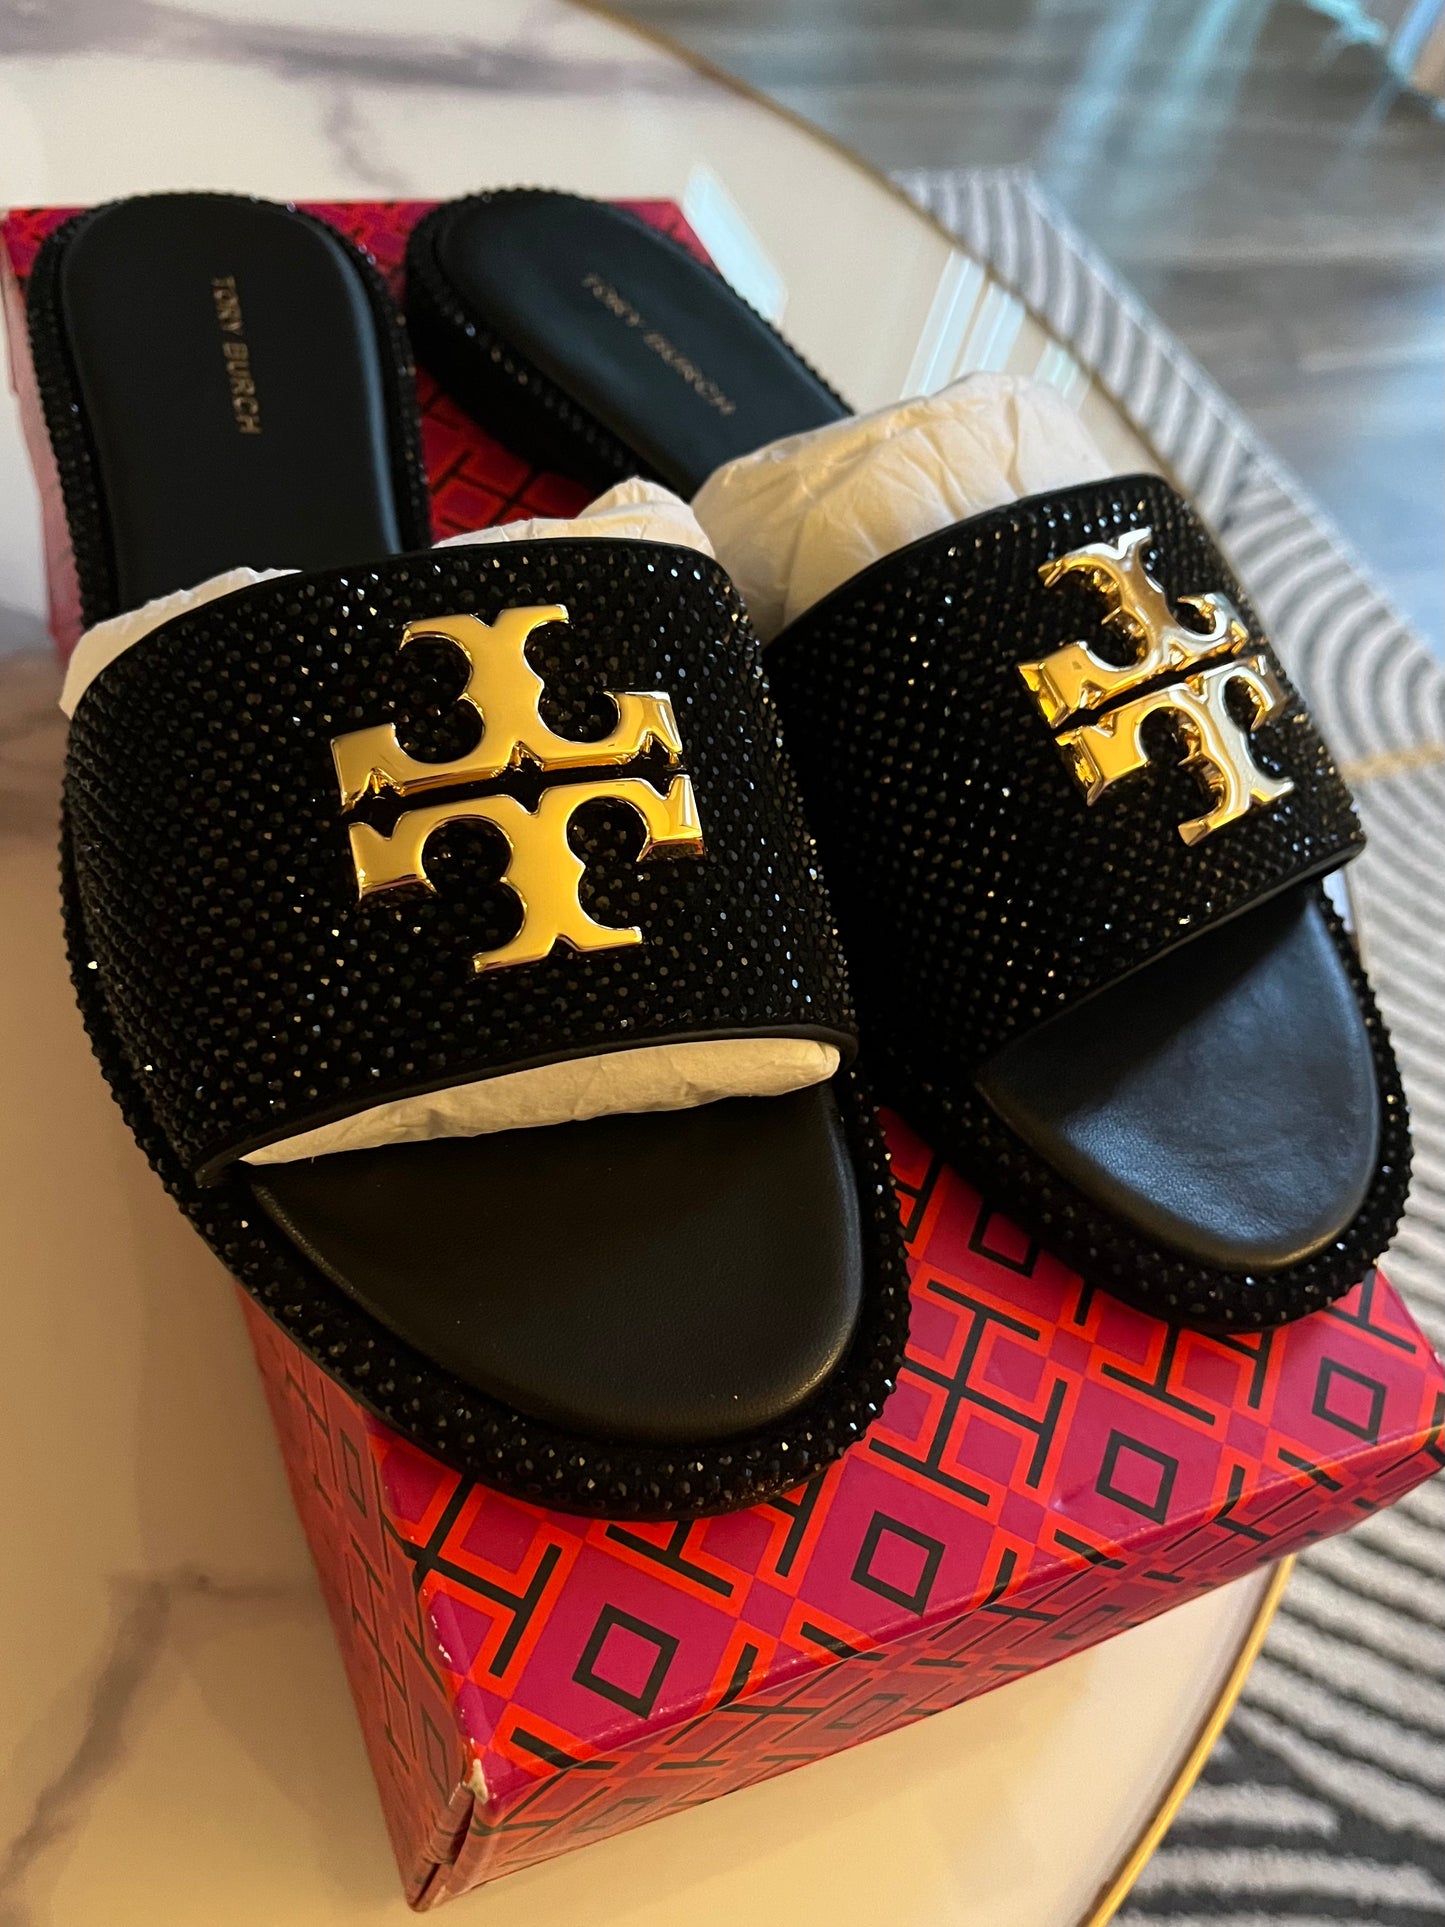 Tory Burch Everly Slide, Royal Suede, Crystal, Perfect Black /Gold, Style 151402